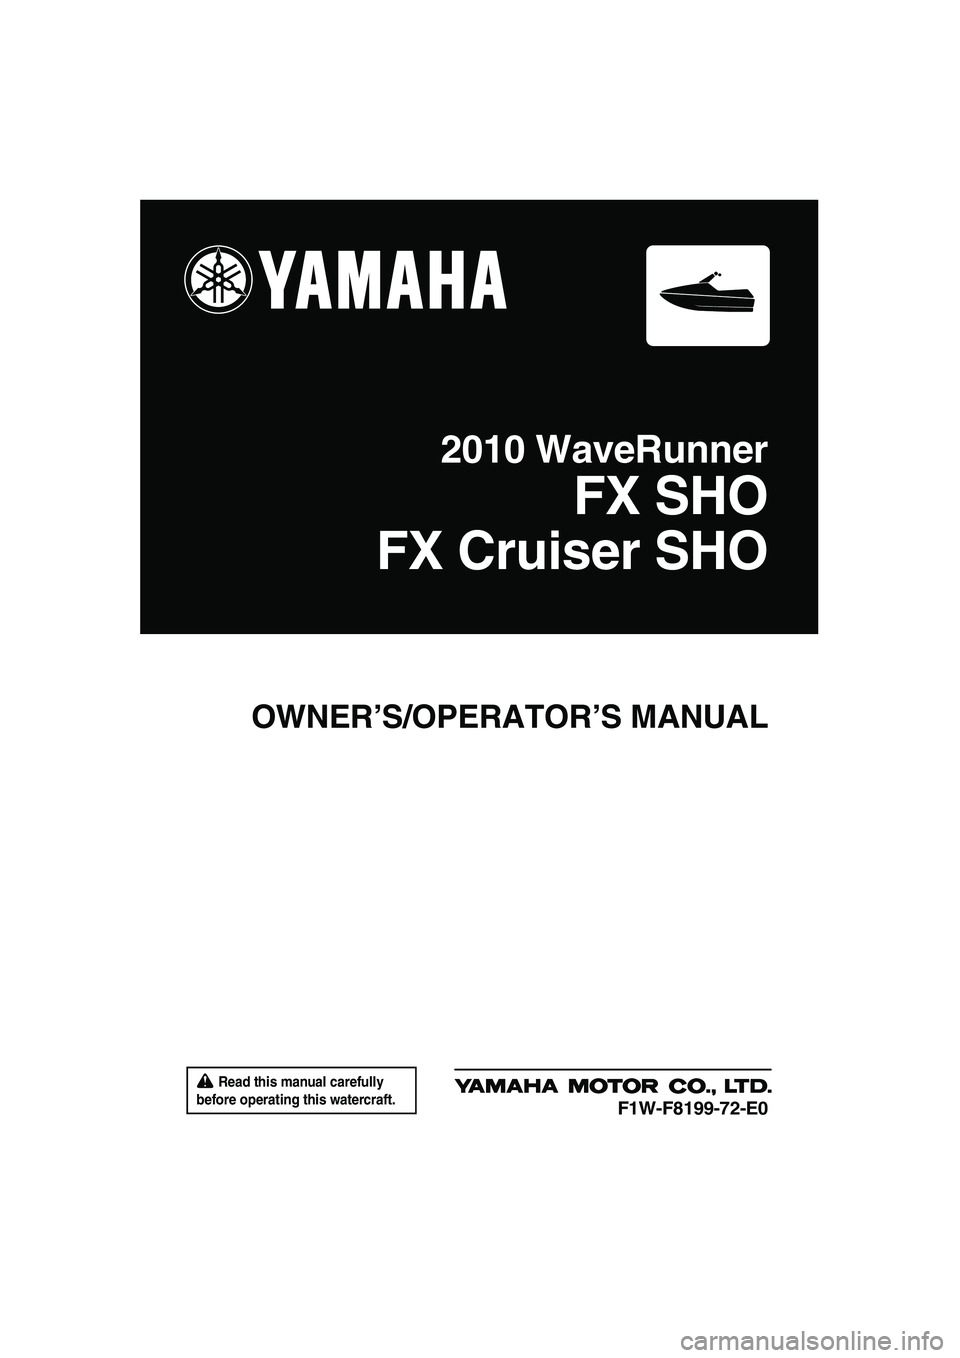 YAMAHA FX SHO 2010  Owners Manual  Read this manual carefully 
before operating this watercraft.
OWNER’S/OPERATOR’S MANUAL
2010 WaveRunner
FX SHO
FX Cruiser SHO
F1W-F8199-72-E0
UF1W72E0.book  Page 1  Monday, June 1, 2009  1:42 PM 